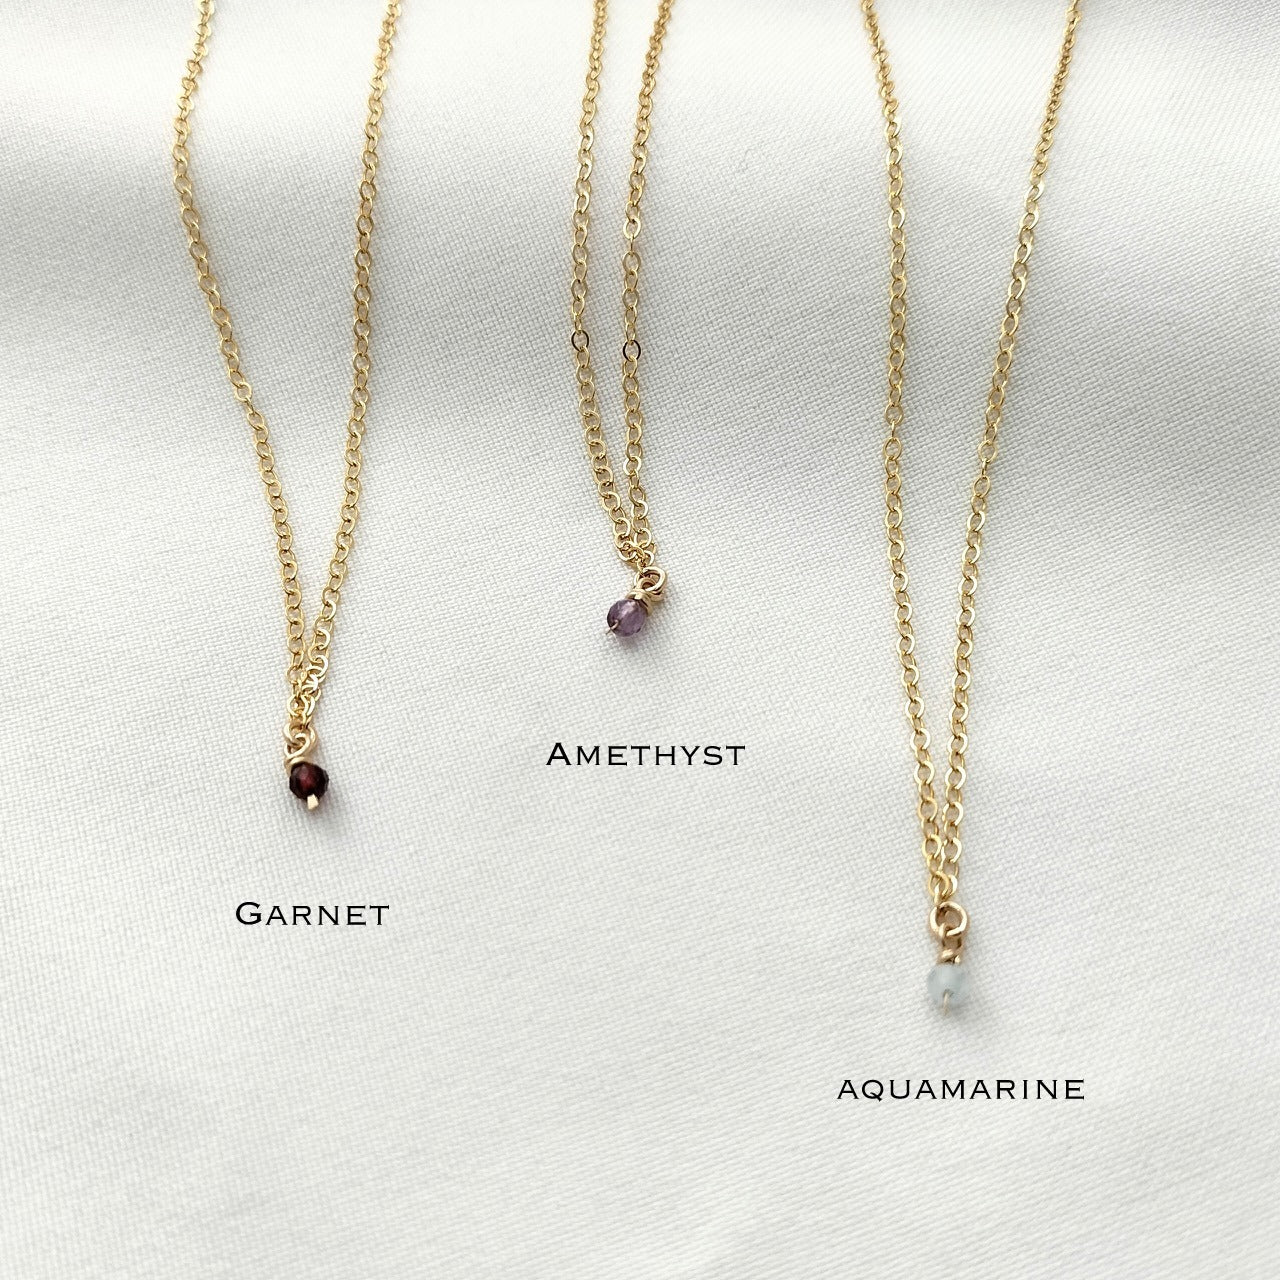 Small birthstone necklace